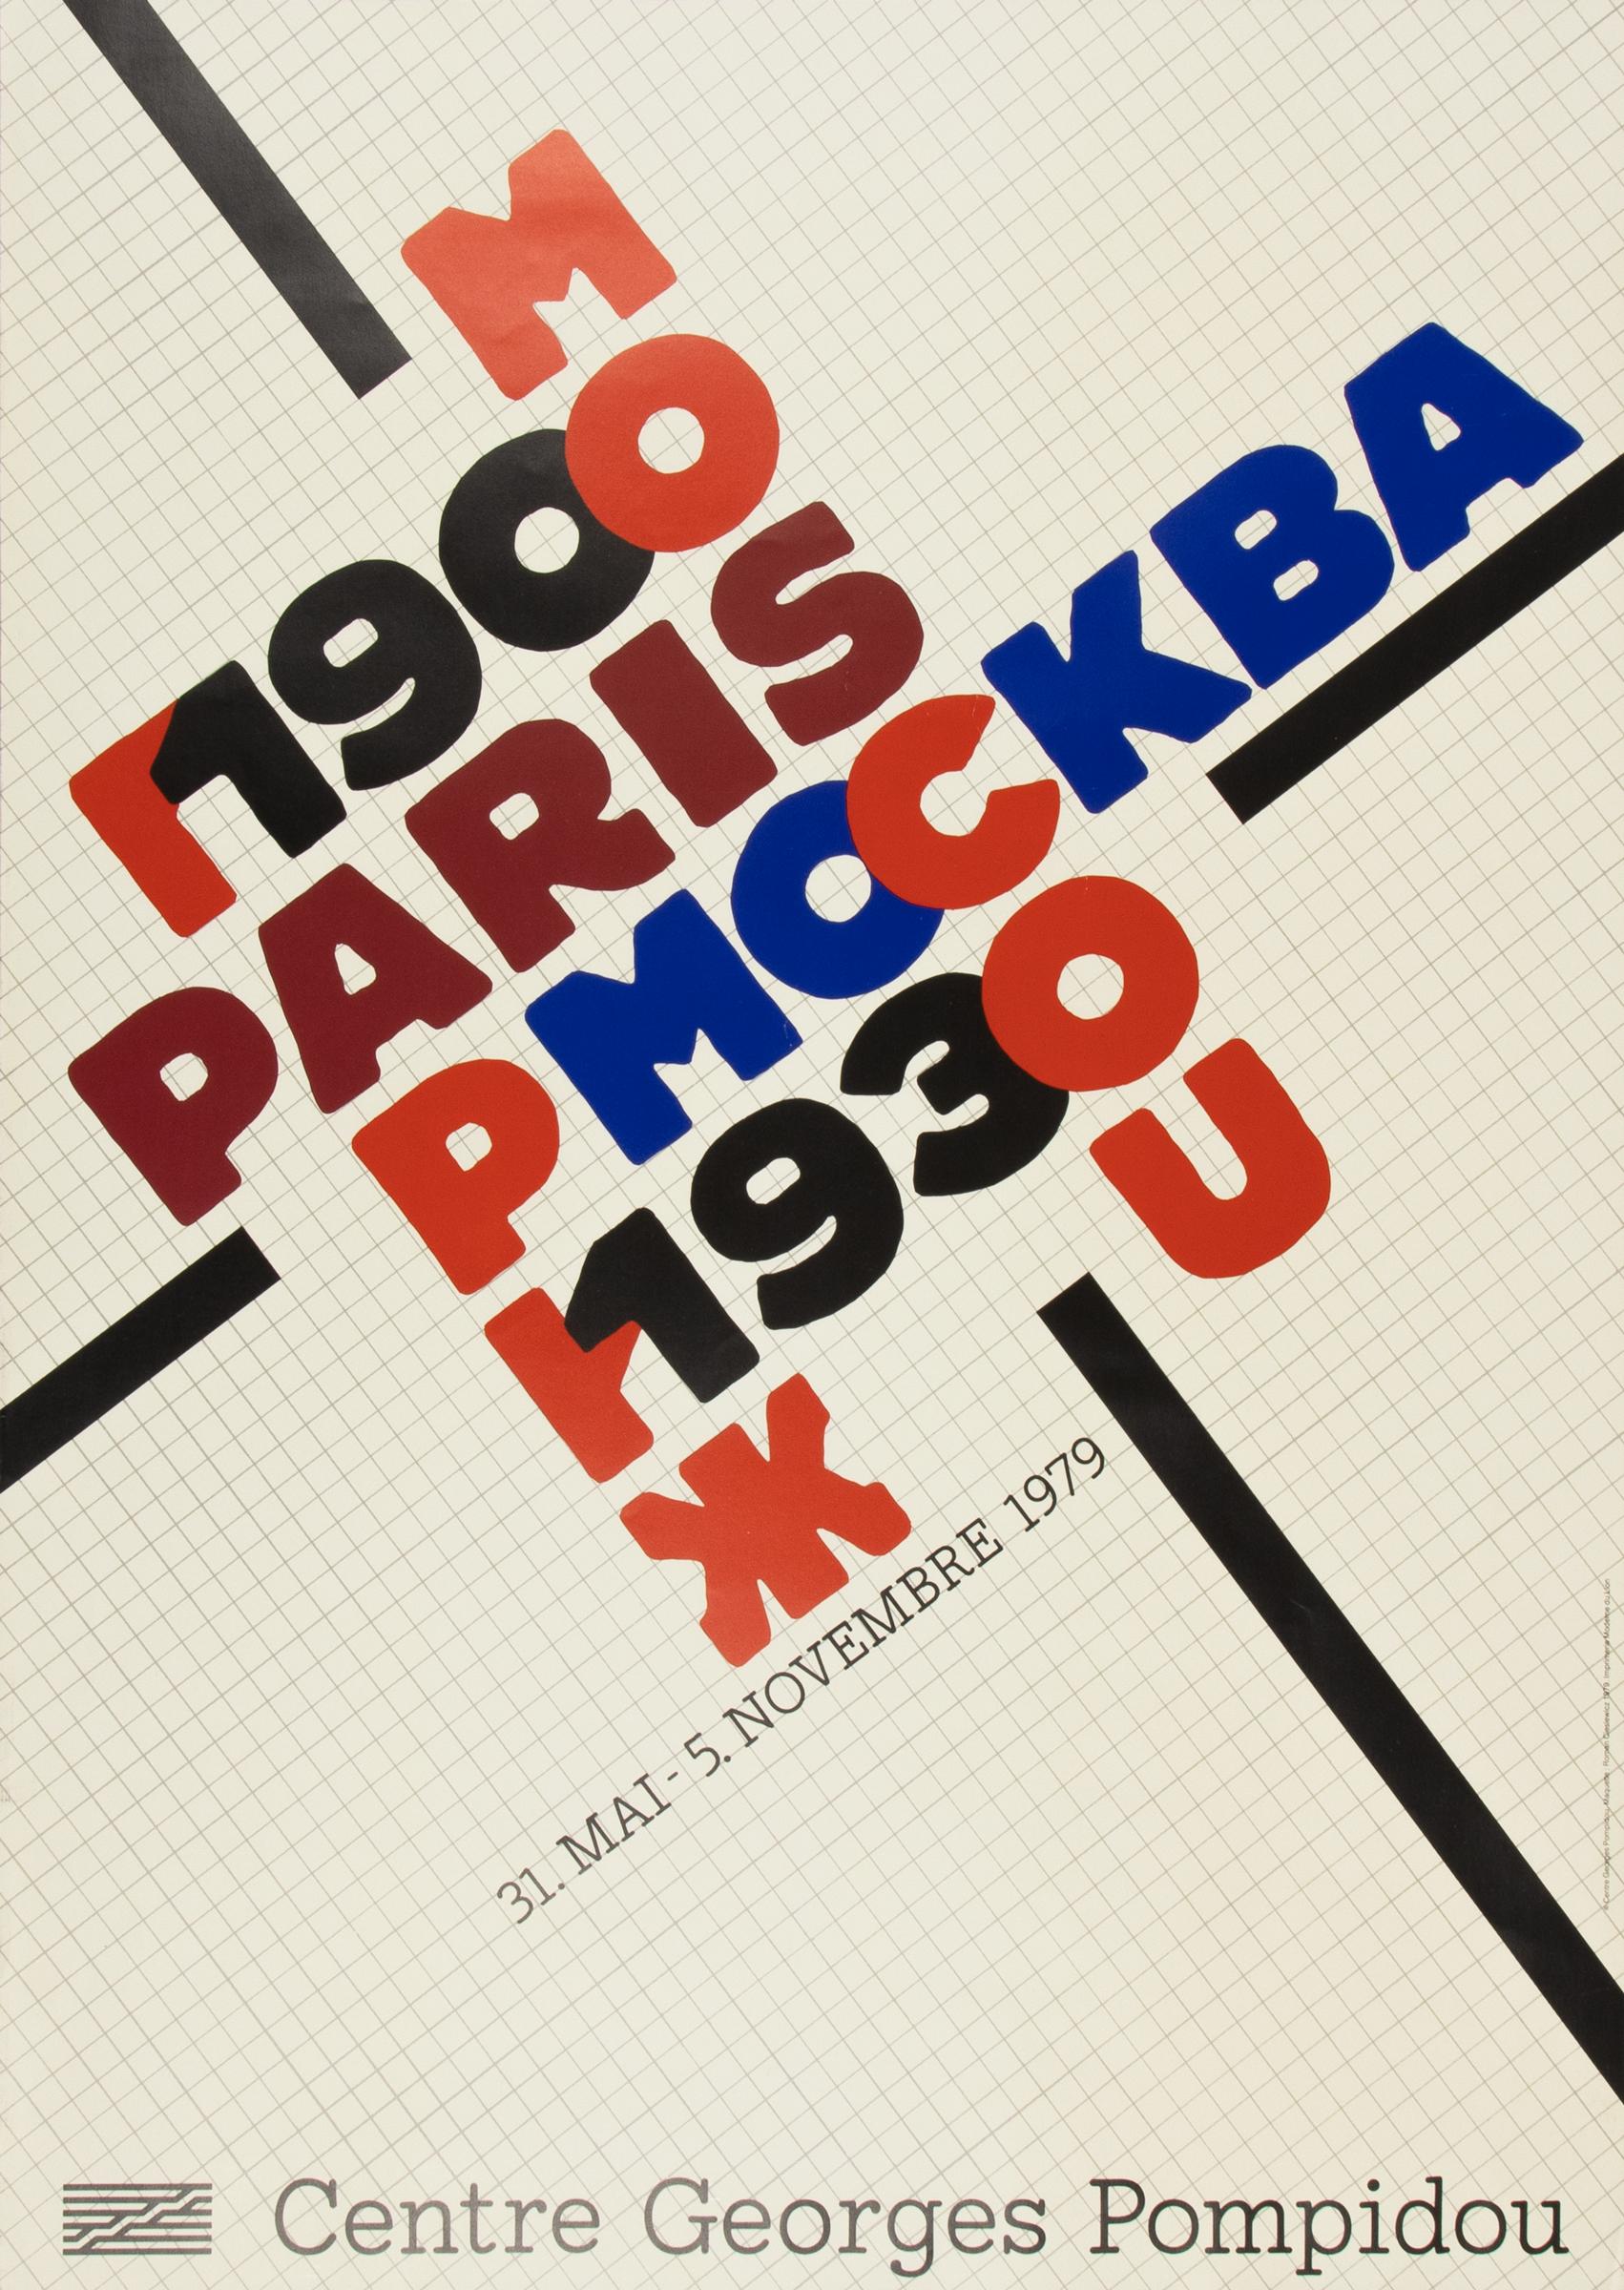 Roman Cieslewicz Abstract Print - Paris-Moscou 1900-1930, Centre Pompidou: Original Exhibition Poster from 1979